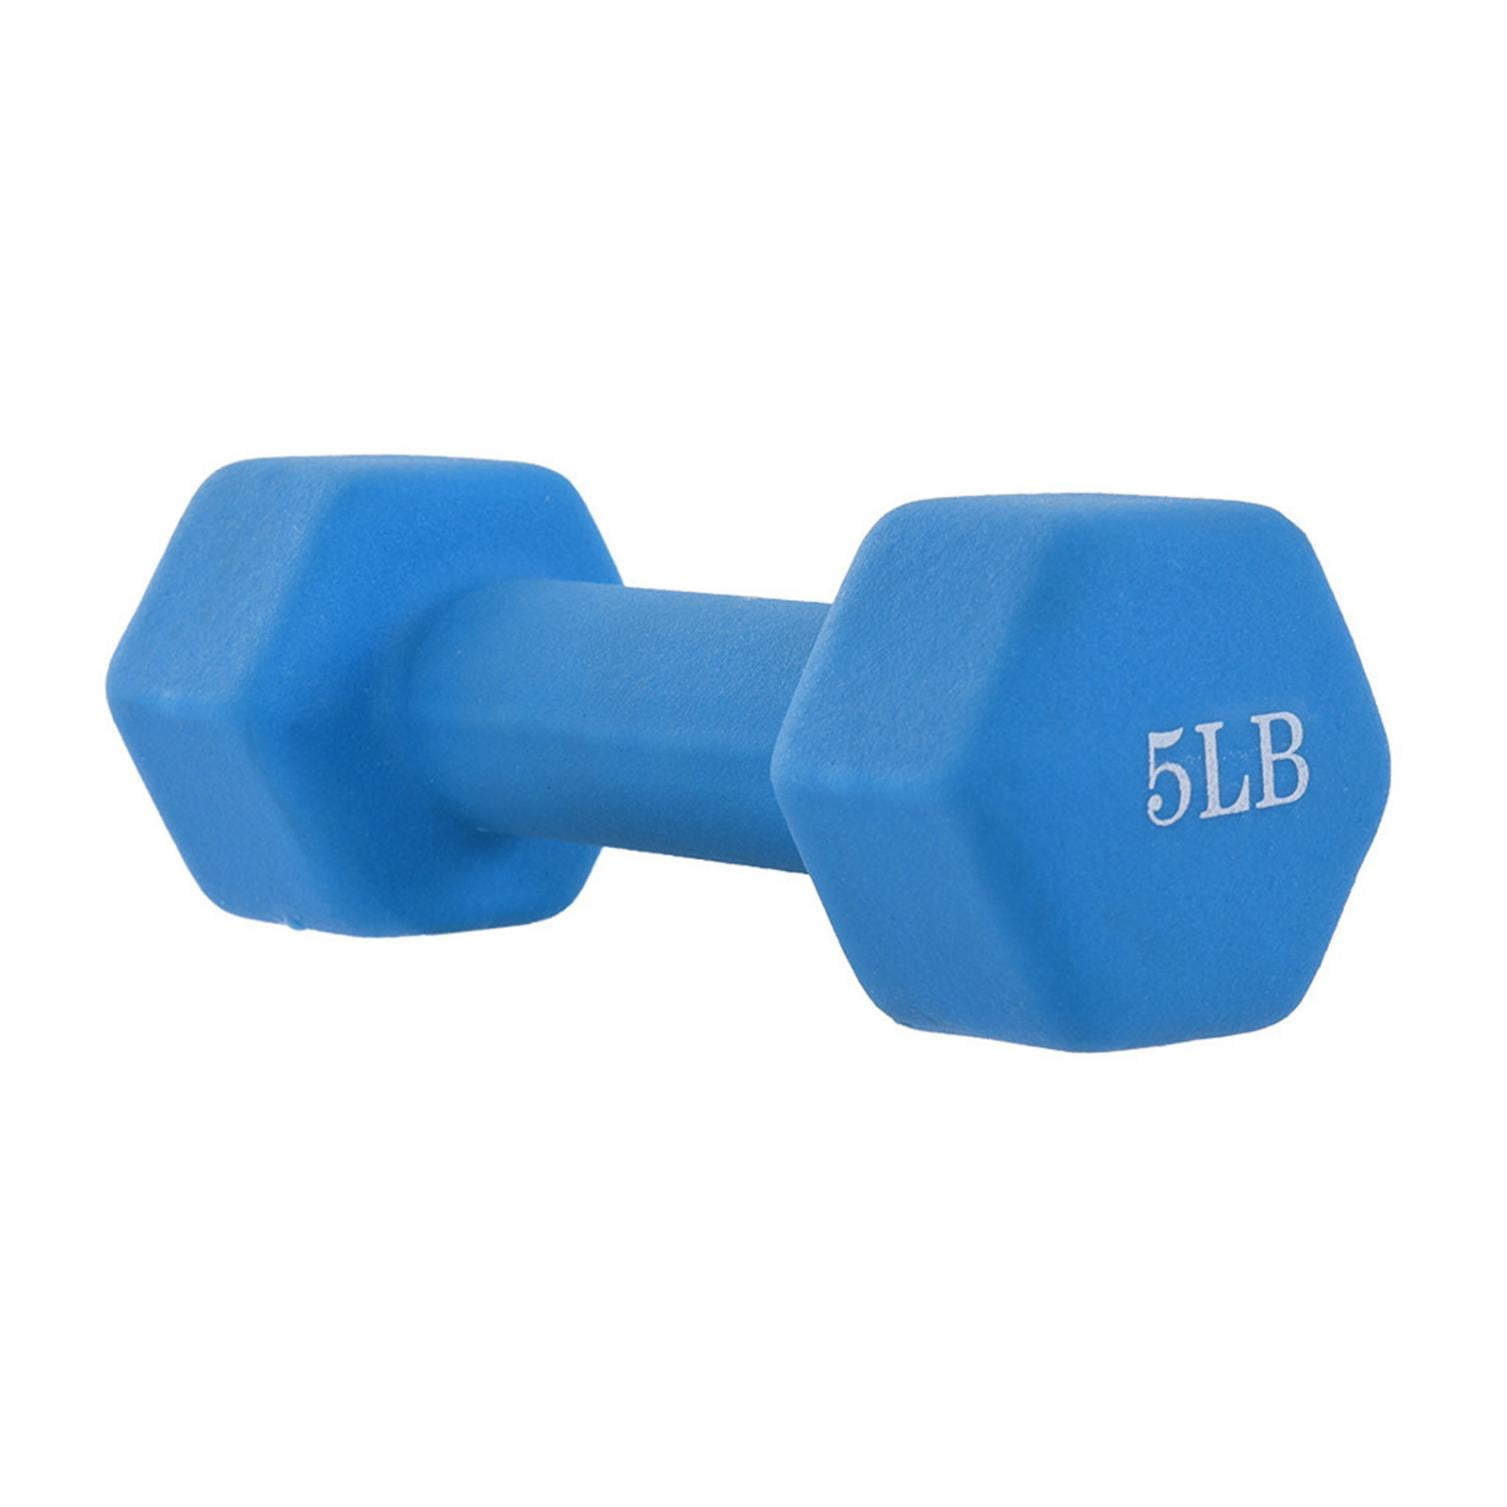 Details about   Barbell Set Of 2 All-Purpose Dumbbells in Pair Neoprene Coated Dumbbell Weights 